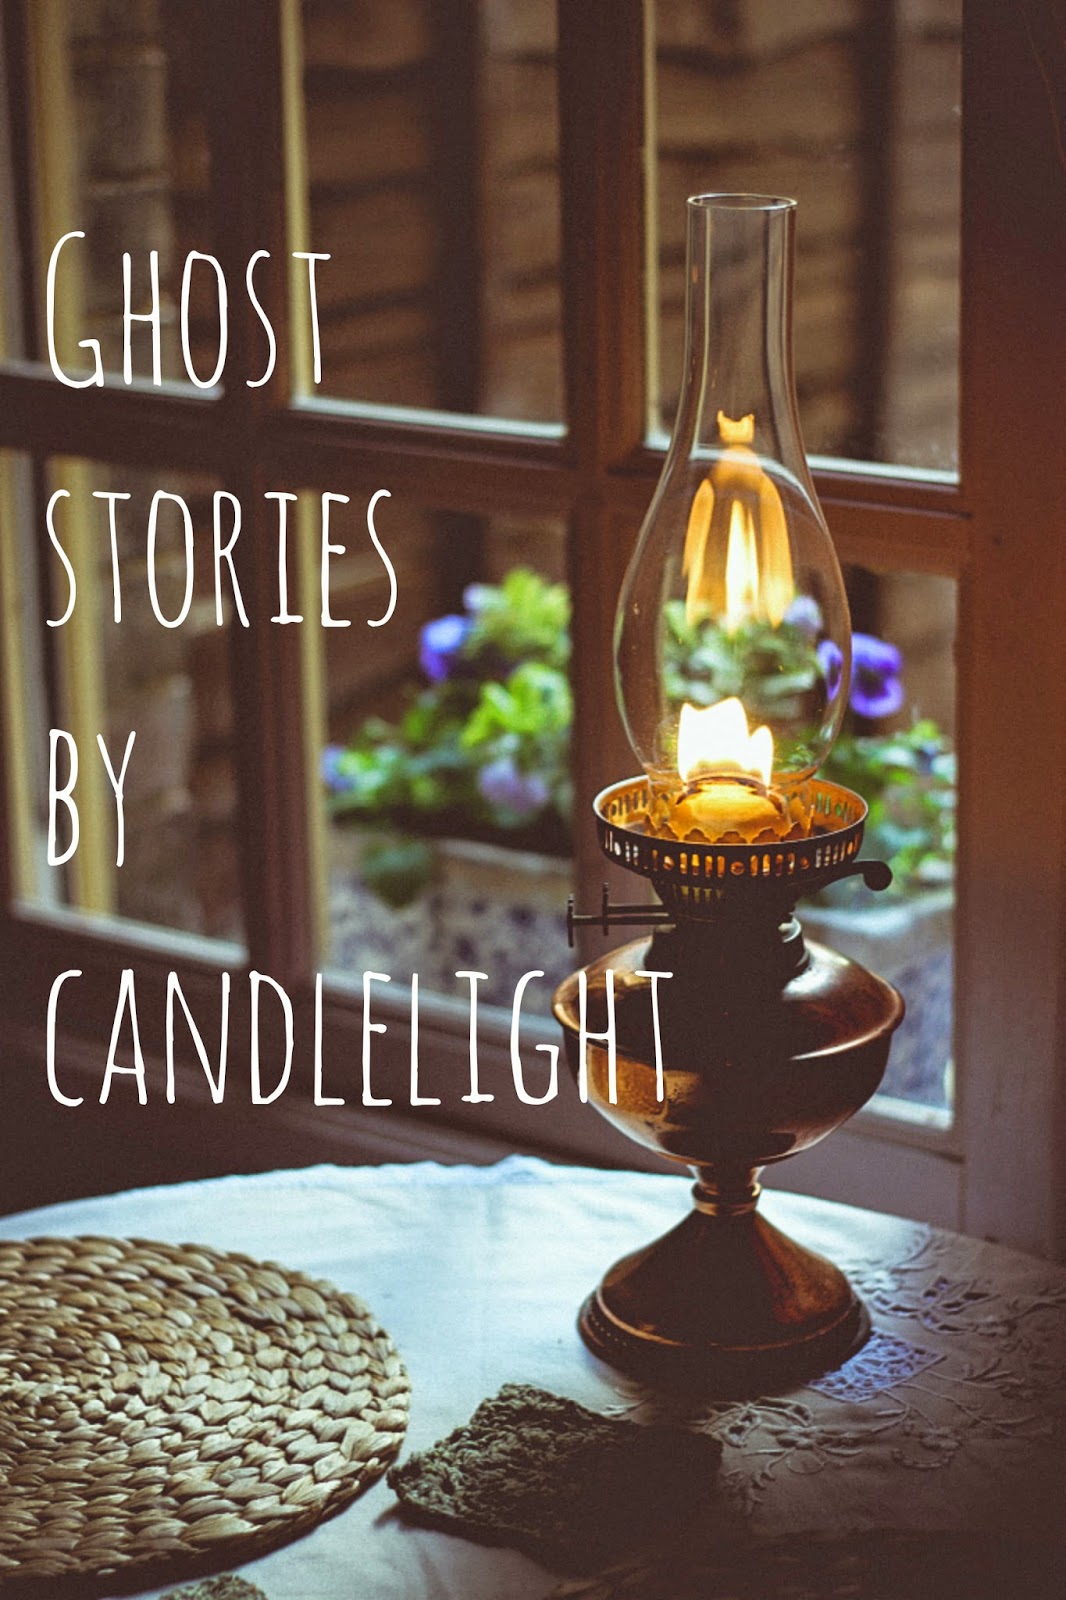 ghost stories by candlelight